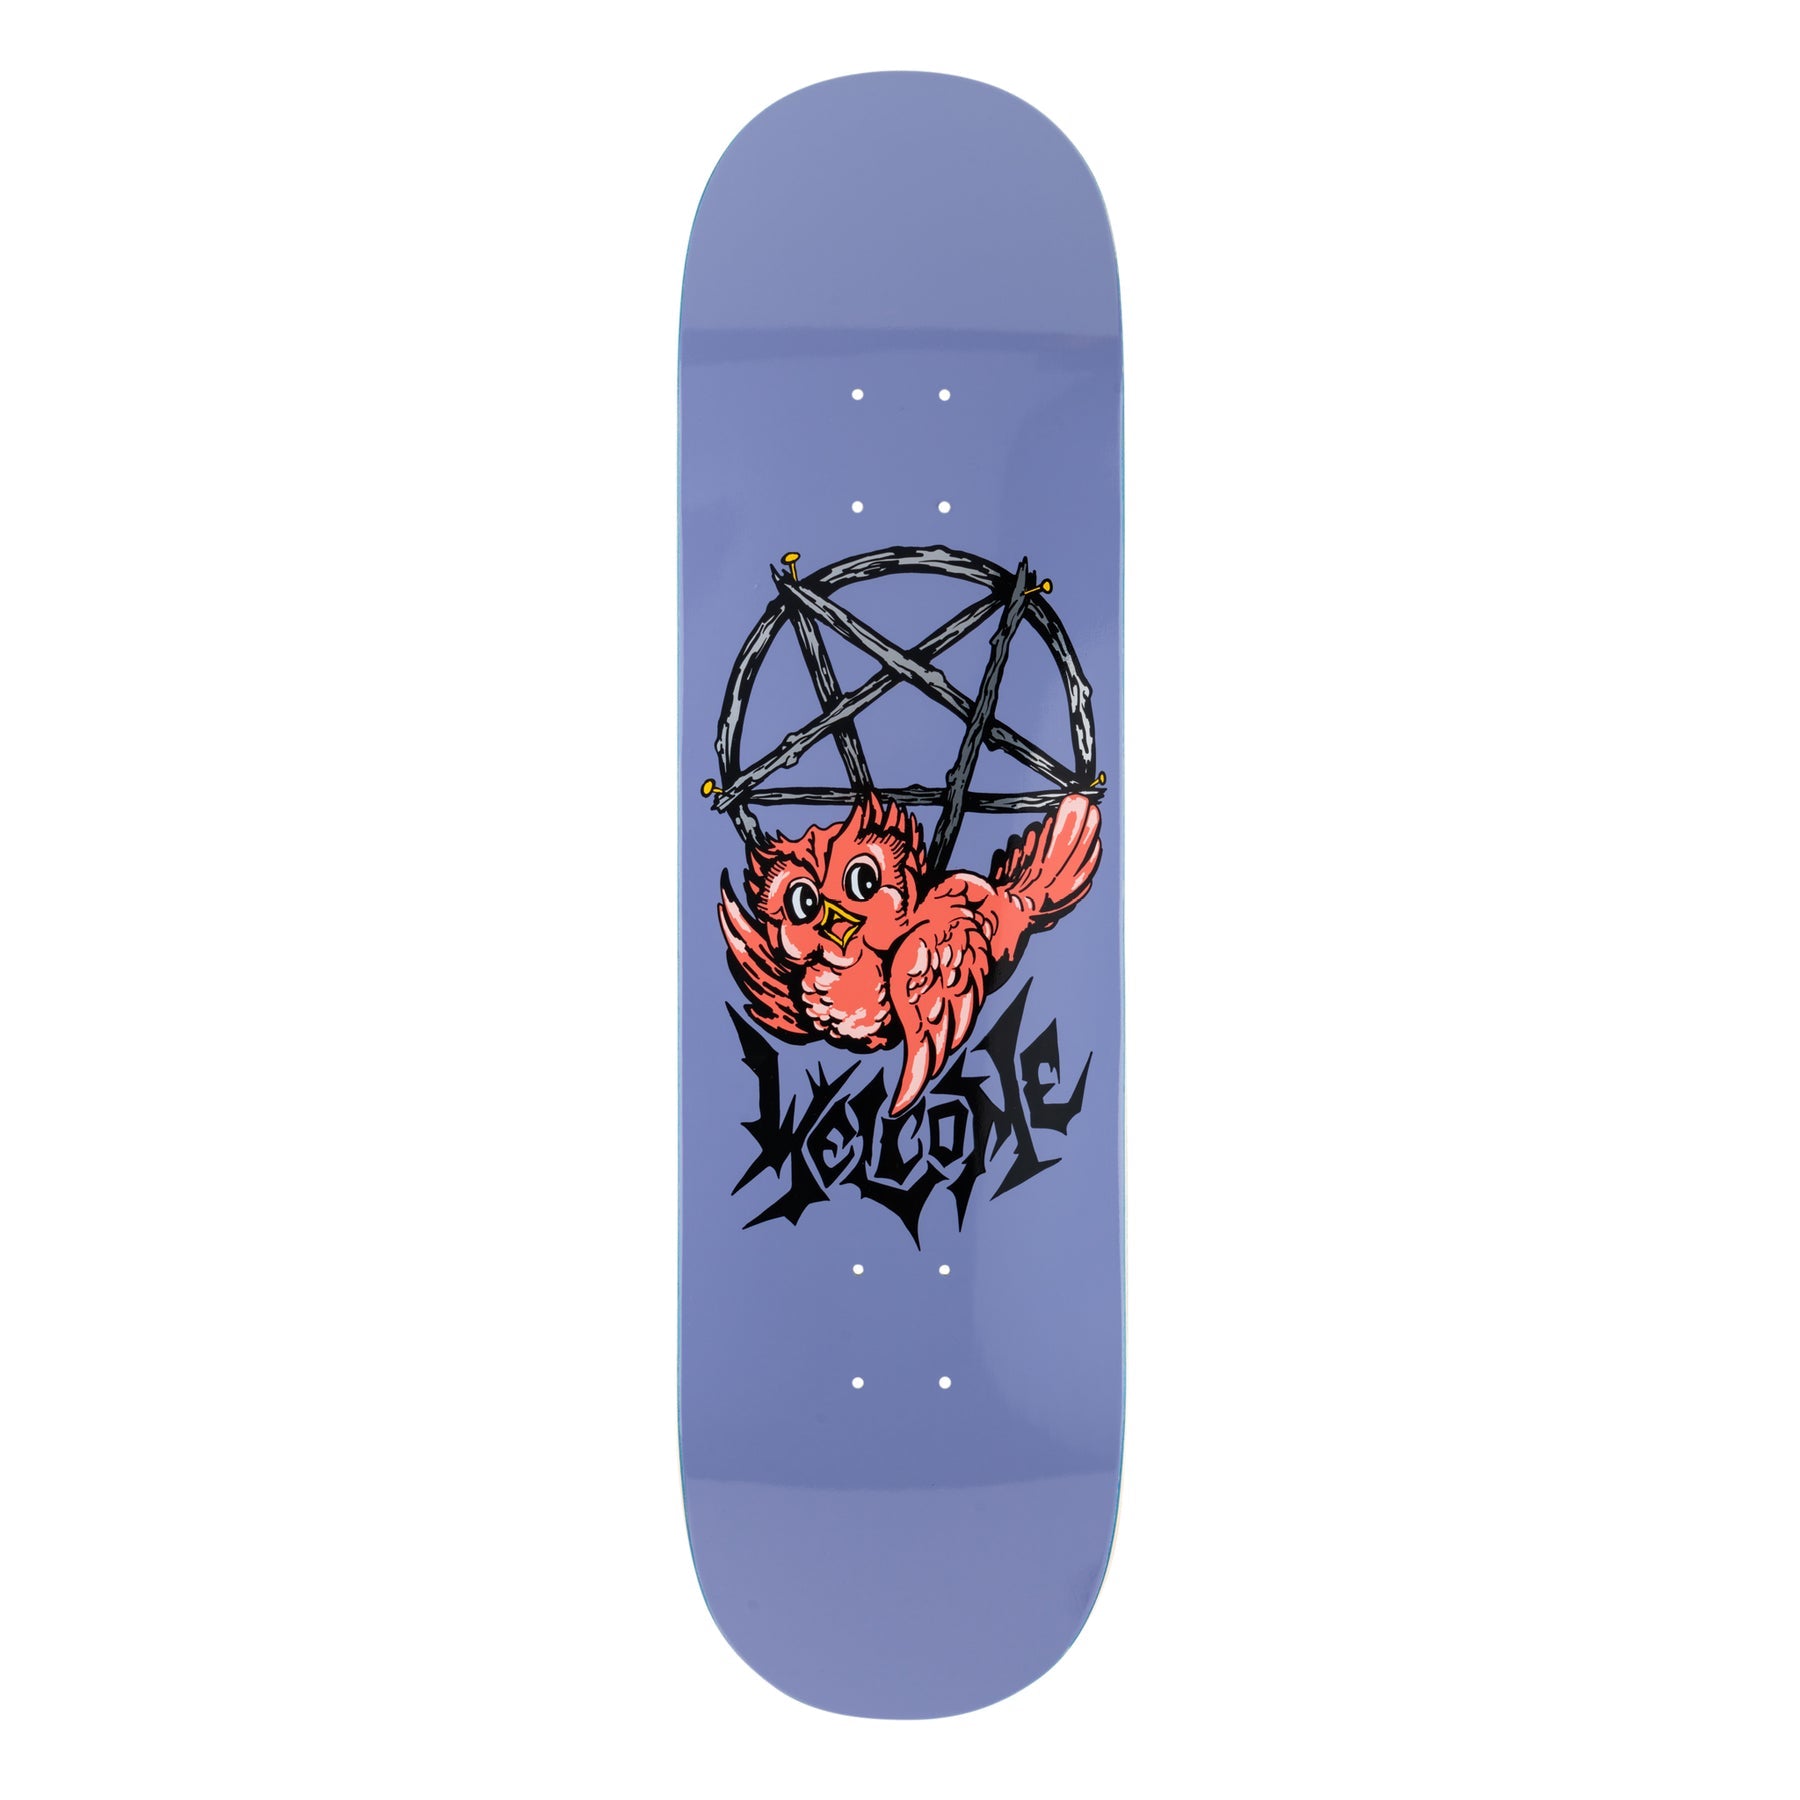 WELCOME DECK LIL' OWL - EVIL TWIN SHAPE (8.5")